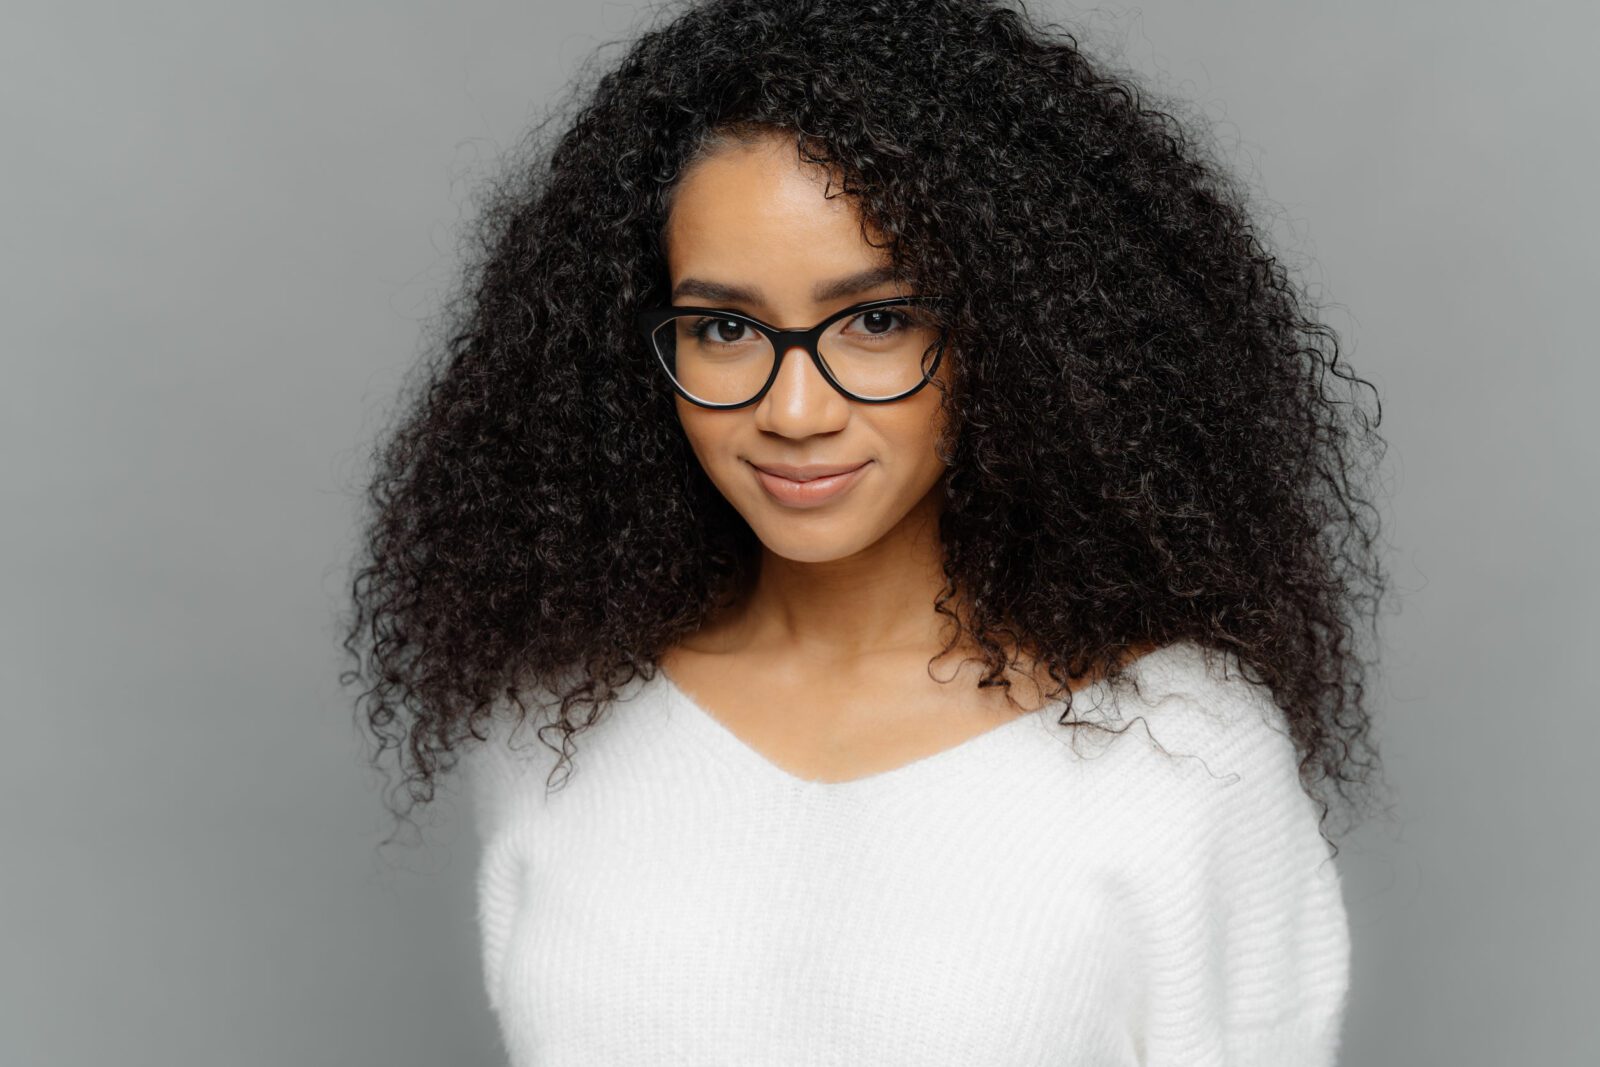 dark skinned female has satisfied expression, bushy curly hair, wears spectacles and white jumper